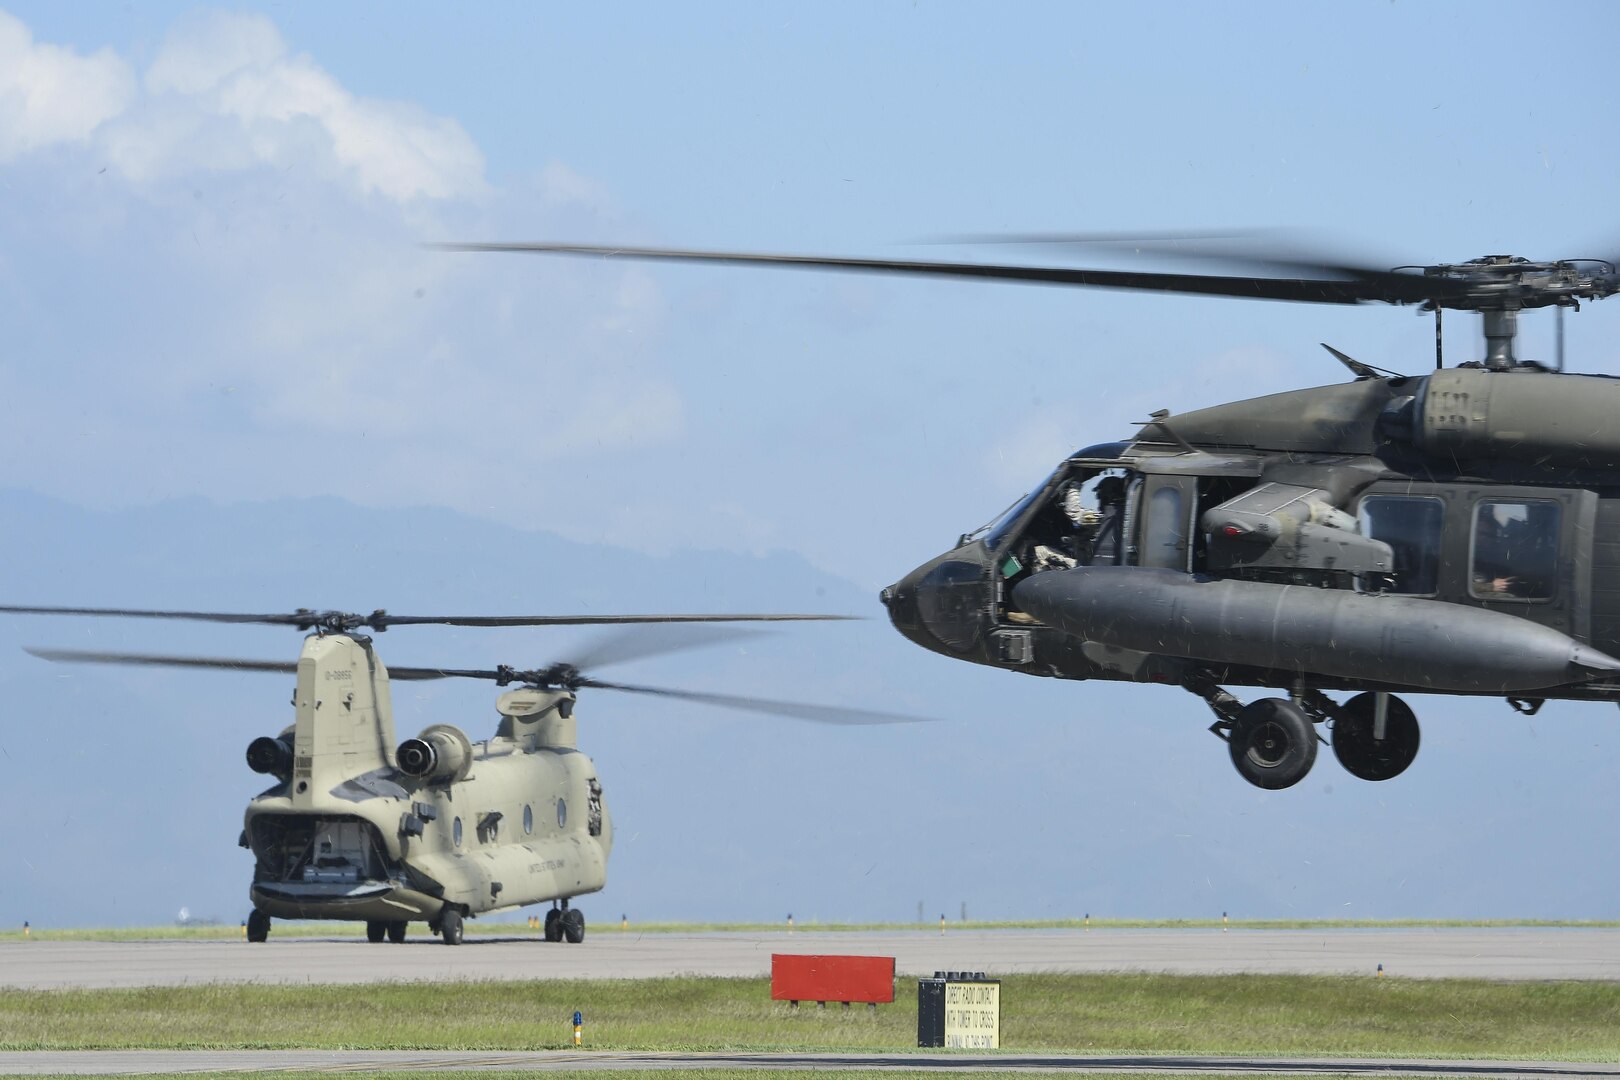 A UH-60 Blackhawk and a CH-47 Chinook helicopters assigned to Joint Task Force-Bravo’s 1st Battalion, 228th aviation regiment, prepare to launch from Soto Cano Air Base, Honduras, Oct. 4, 2016, to stage at the Grand Cayman Islands to provide airlift capabilities for Hurricane Matthew relief efforts if requested by the U.S. Agency for International Development’s Office of Foreign Disaster Assistance. The mission of Joint Task Force-Bravo includes being prepared to support disaster relief operations in Central America, South America and the Caribbean, when directed by SOUTHCOM. (U.S. Air Force photo by Staff Sgt. Siuta B. Ika)